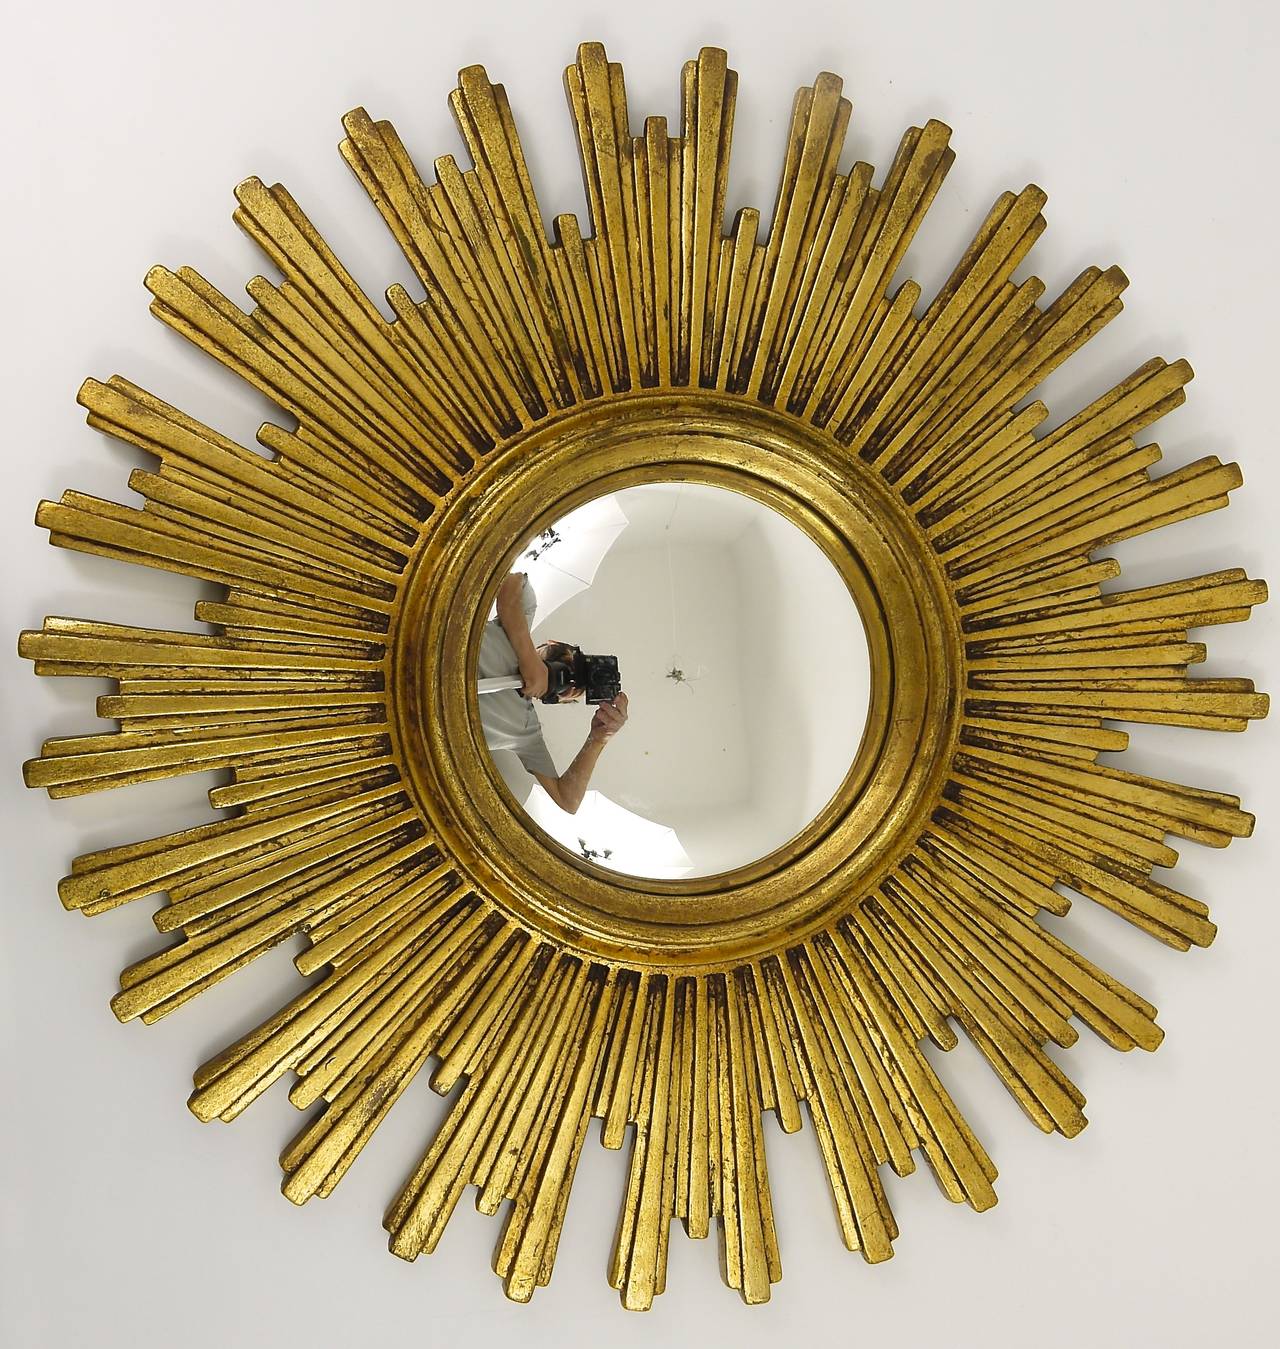 One of three beautiful and big sunburst/starburst gilt wall mirror with convex mirror glass from France, dated around 1950. A very beautiful and decorative object in very good condition. Diameter 22